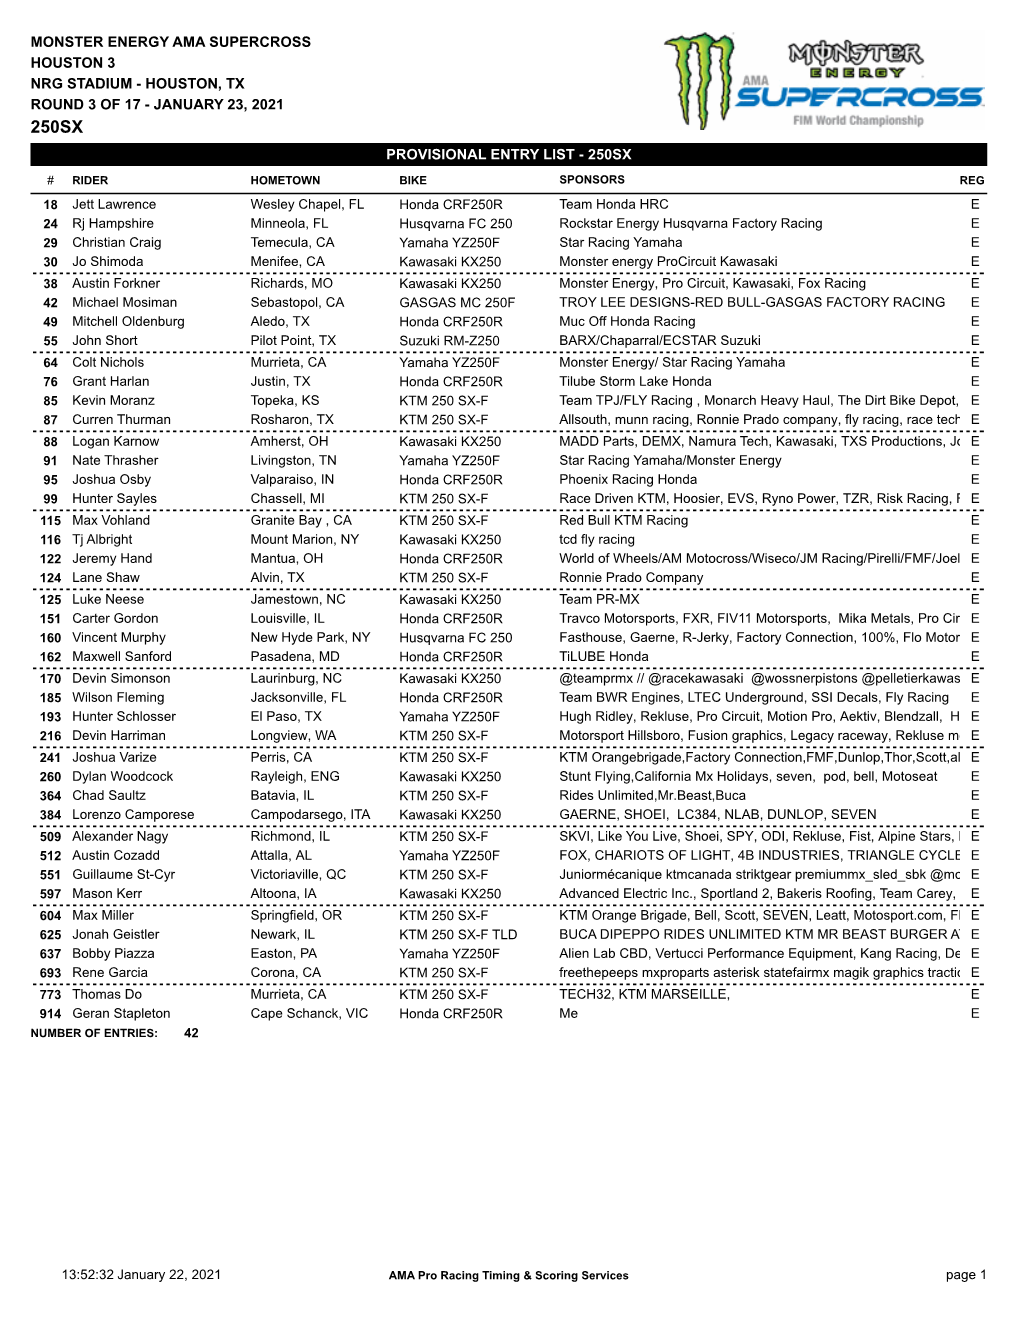 Provisional Entry List - 250Sx